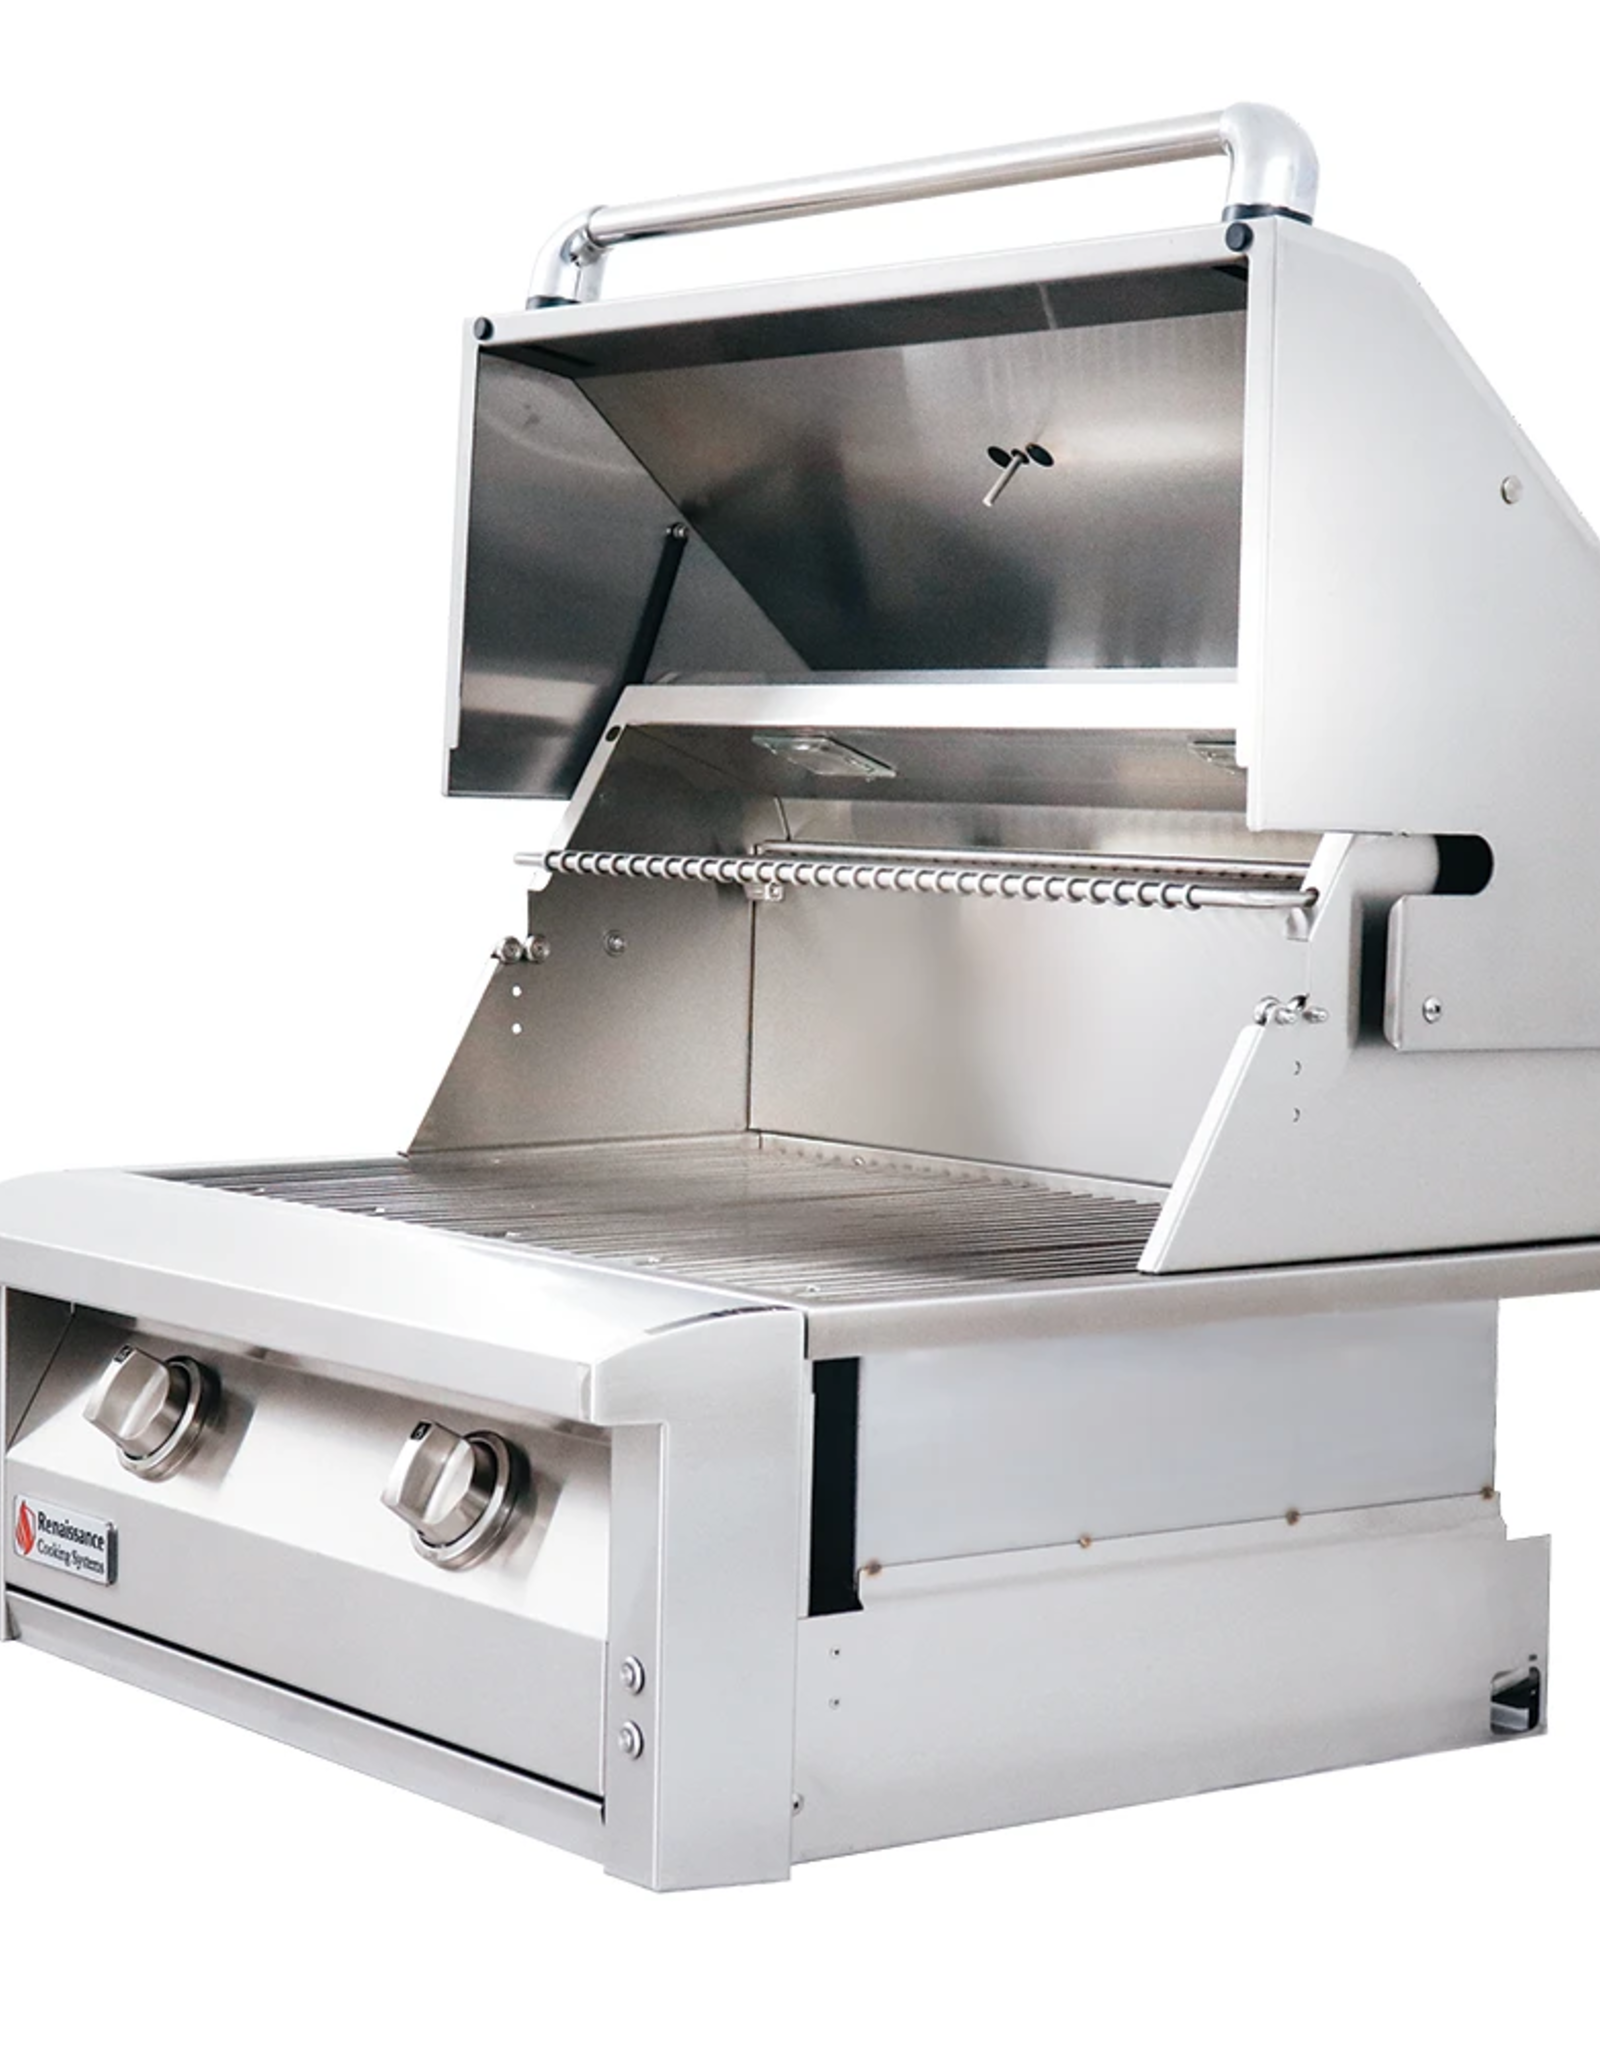 Renaissance Cooking Systems Renaissance Cooking Systems ARG 30" Drop-In Grill - ARG30